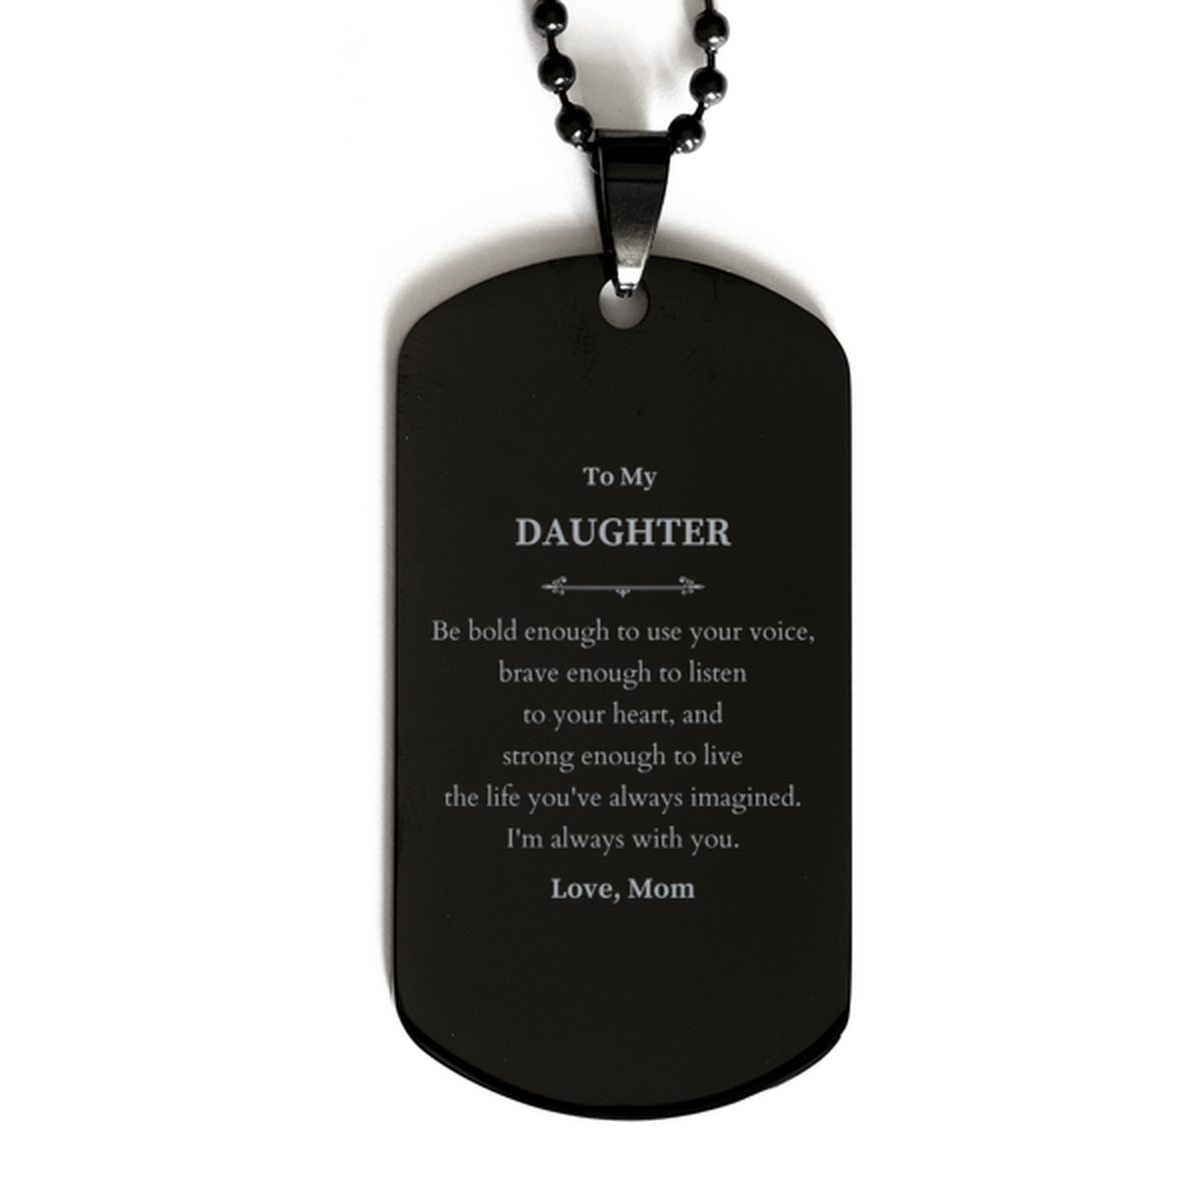 Keepsake Daughter Black Dog Tag Gift Idea Graduation Christmas Birthday Daughter from Mom, Daughter Be bold enough to use your voice, brave enough to listen to your heart. Love, Mom